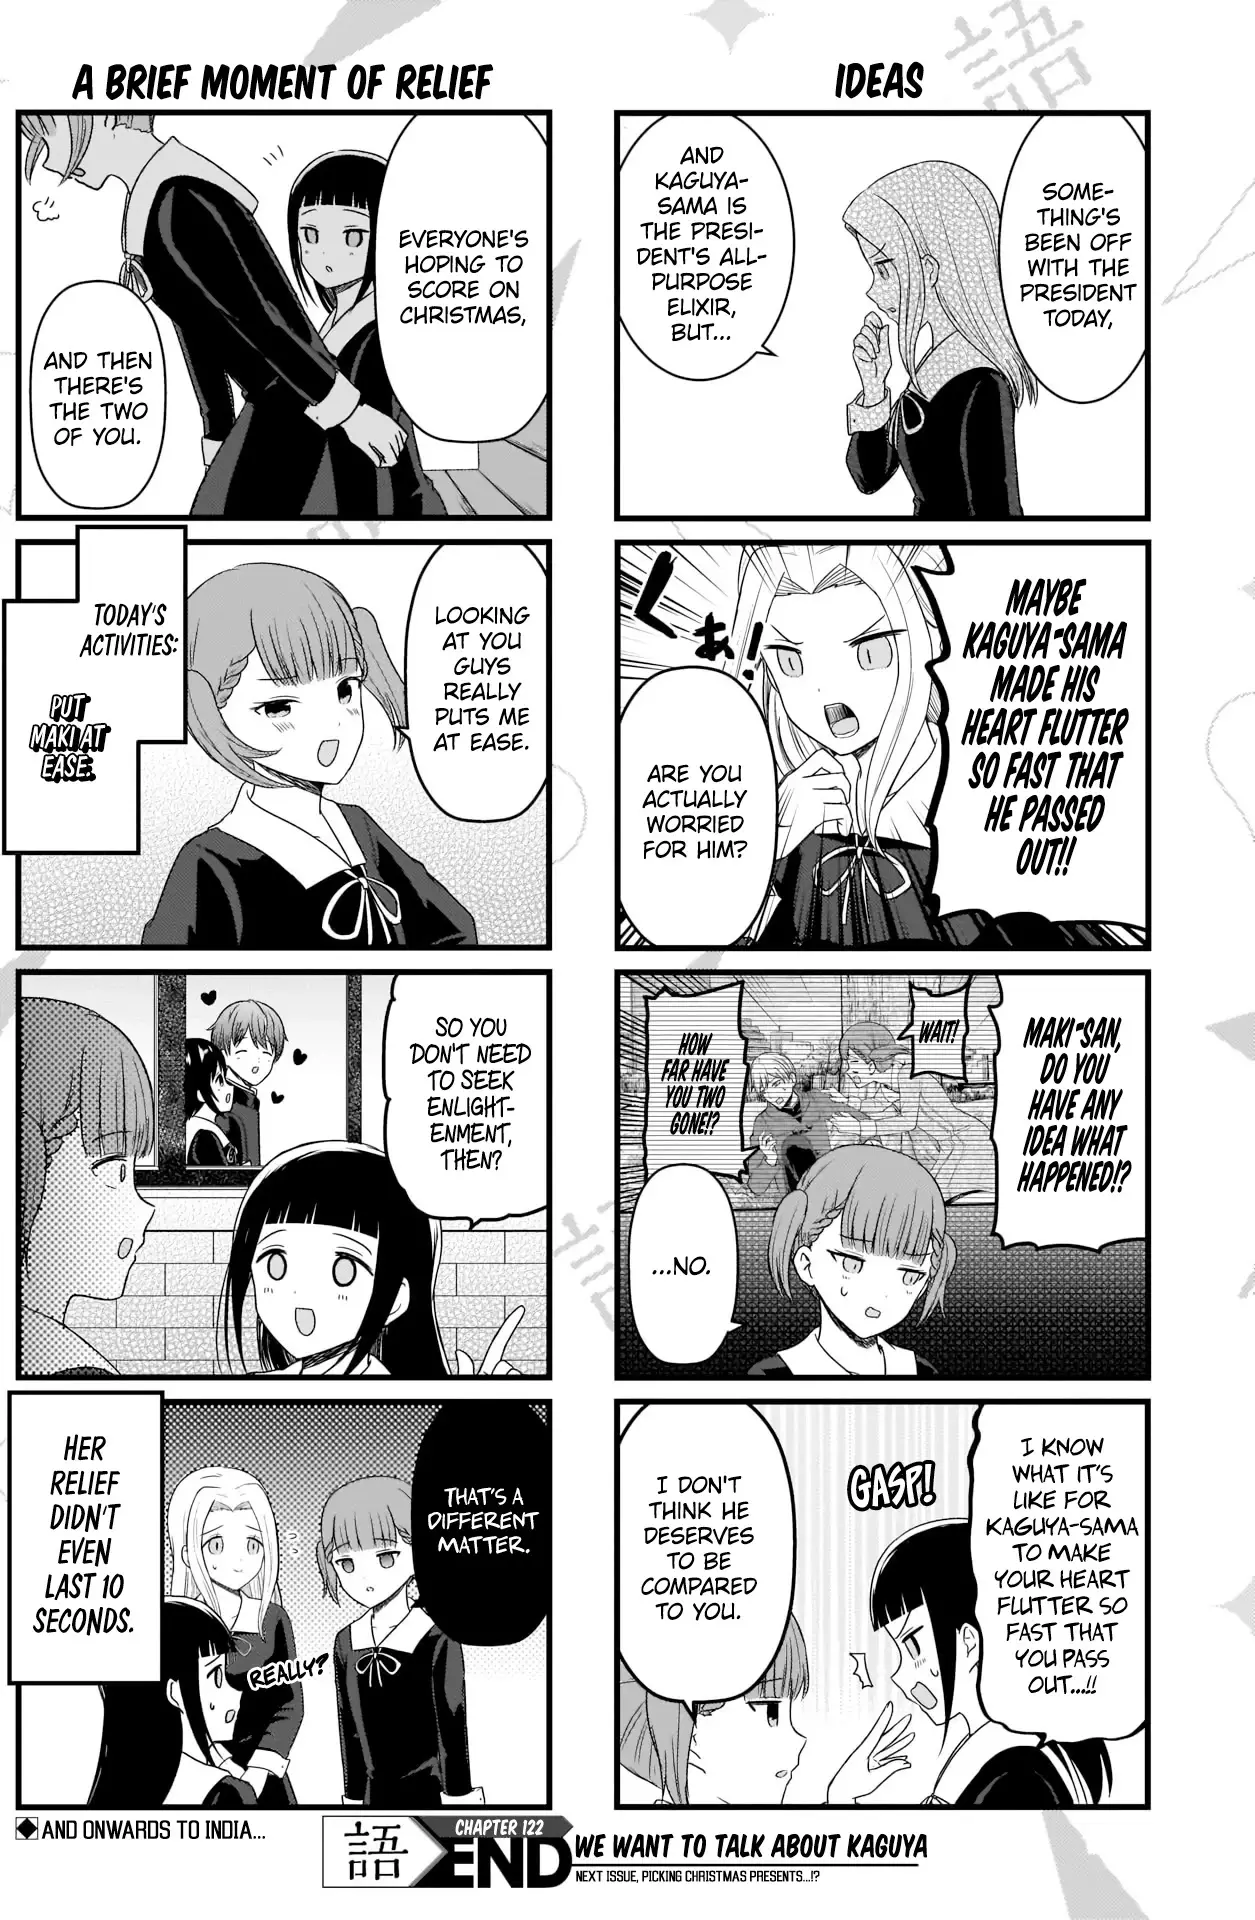 We Want To Talk About Kaguya - 122 page 5